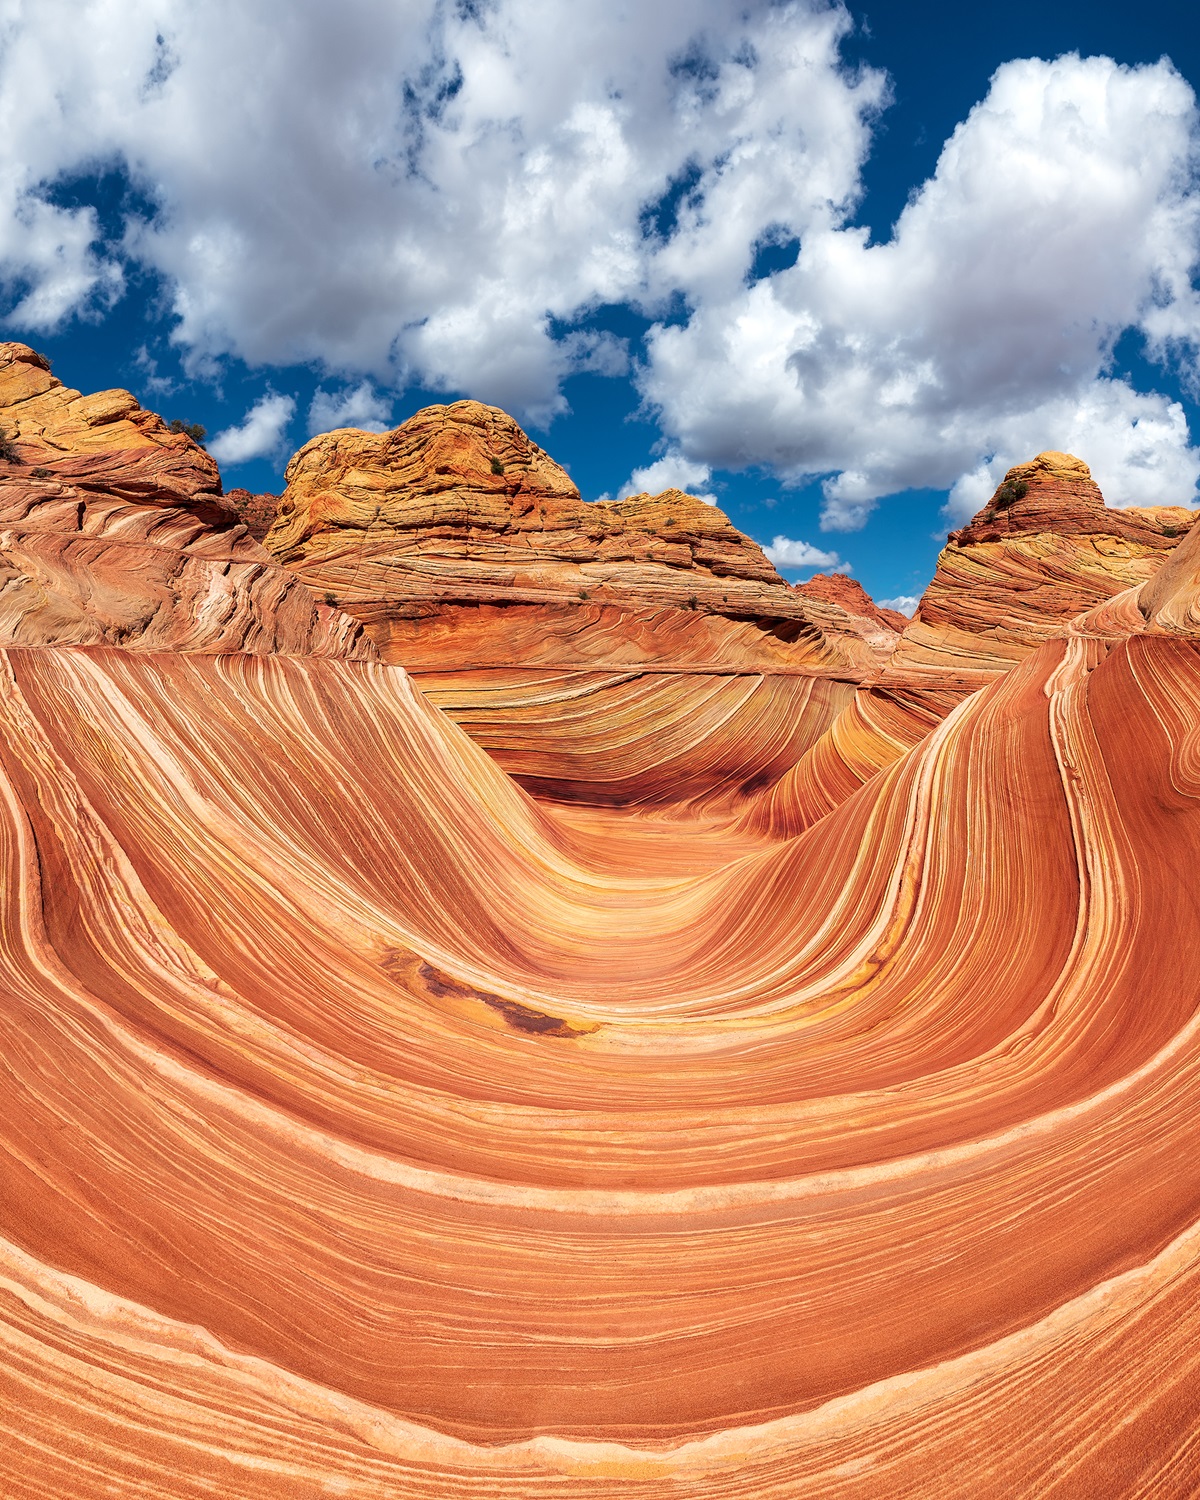 It Took Me 3 Years To Get A Permit To Visit This Surreal Rock Formation Called The Wave In Arizona - It Was Worth It!